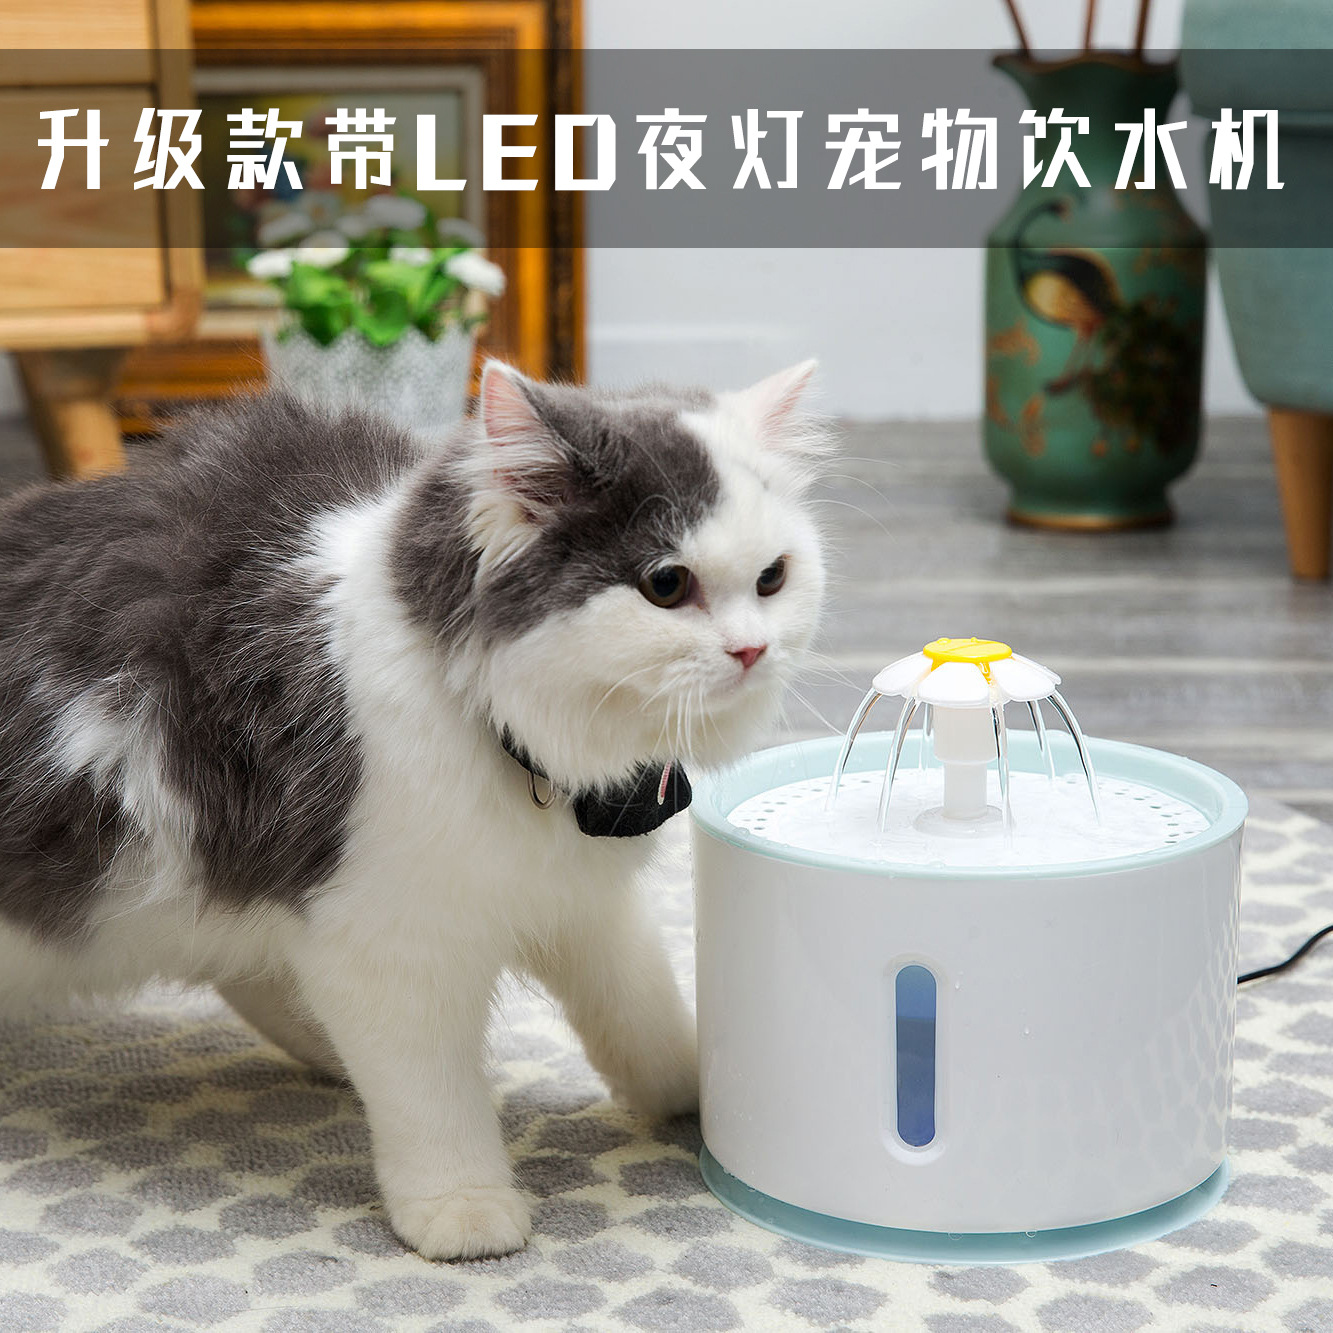 Upgraded Floret Water Feeder LED Night Light Floret Automatic Fountain Drinker Water Feeder Pet Water Dispenser